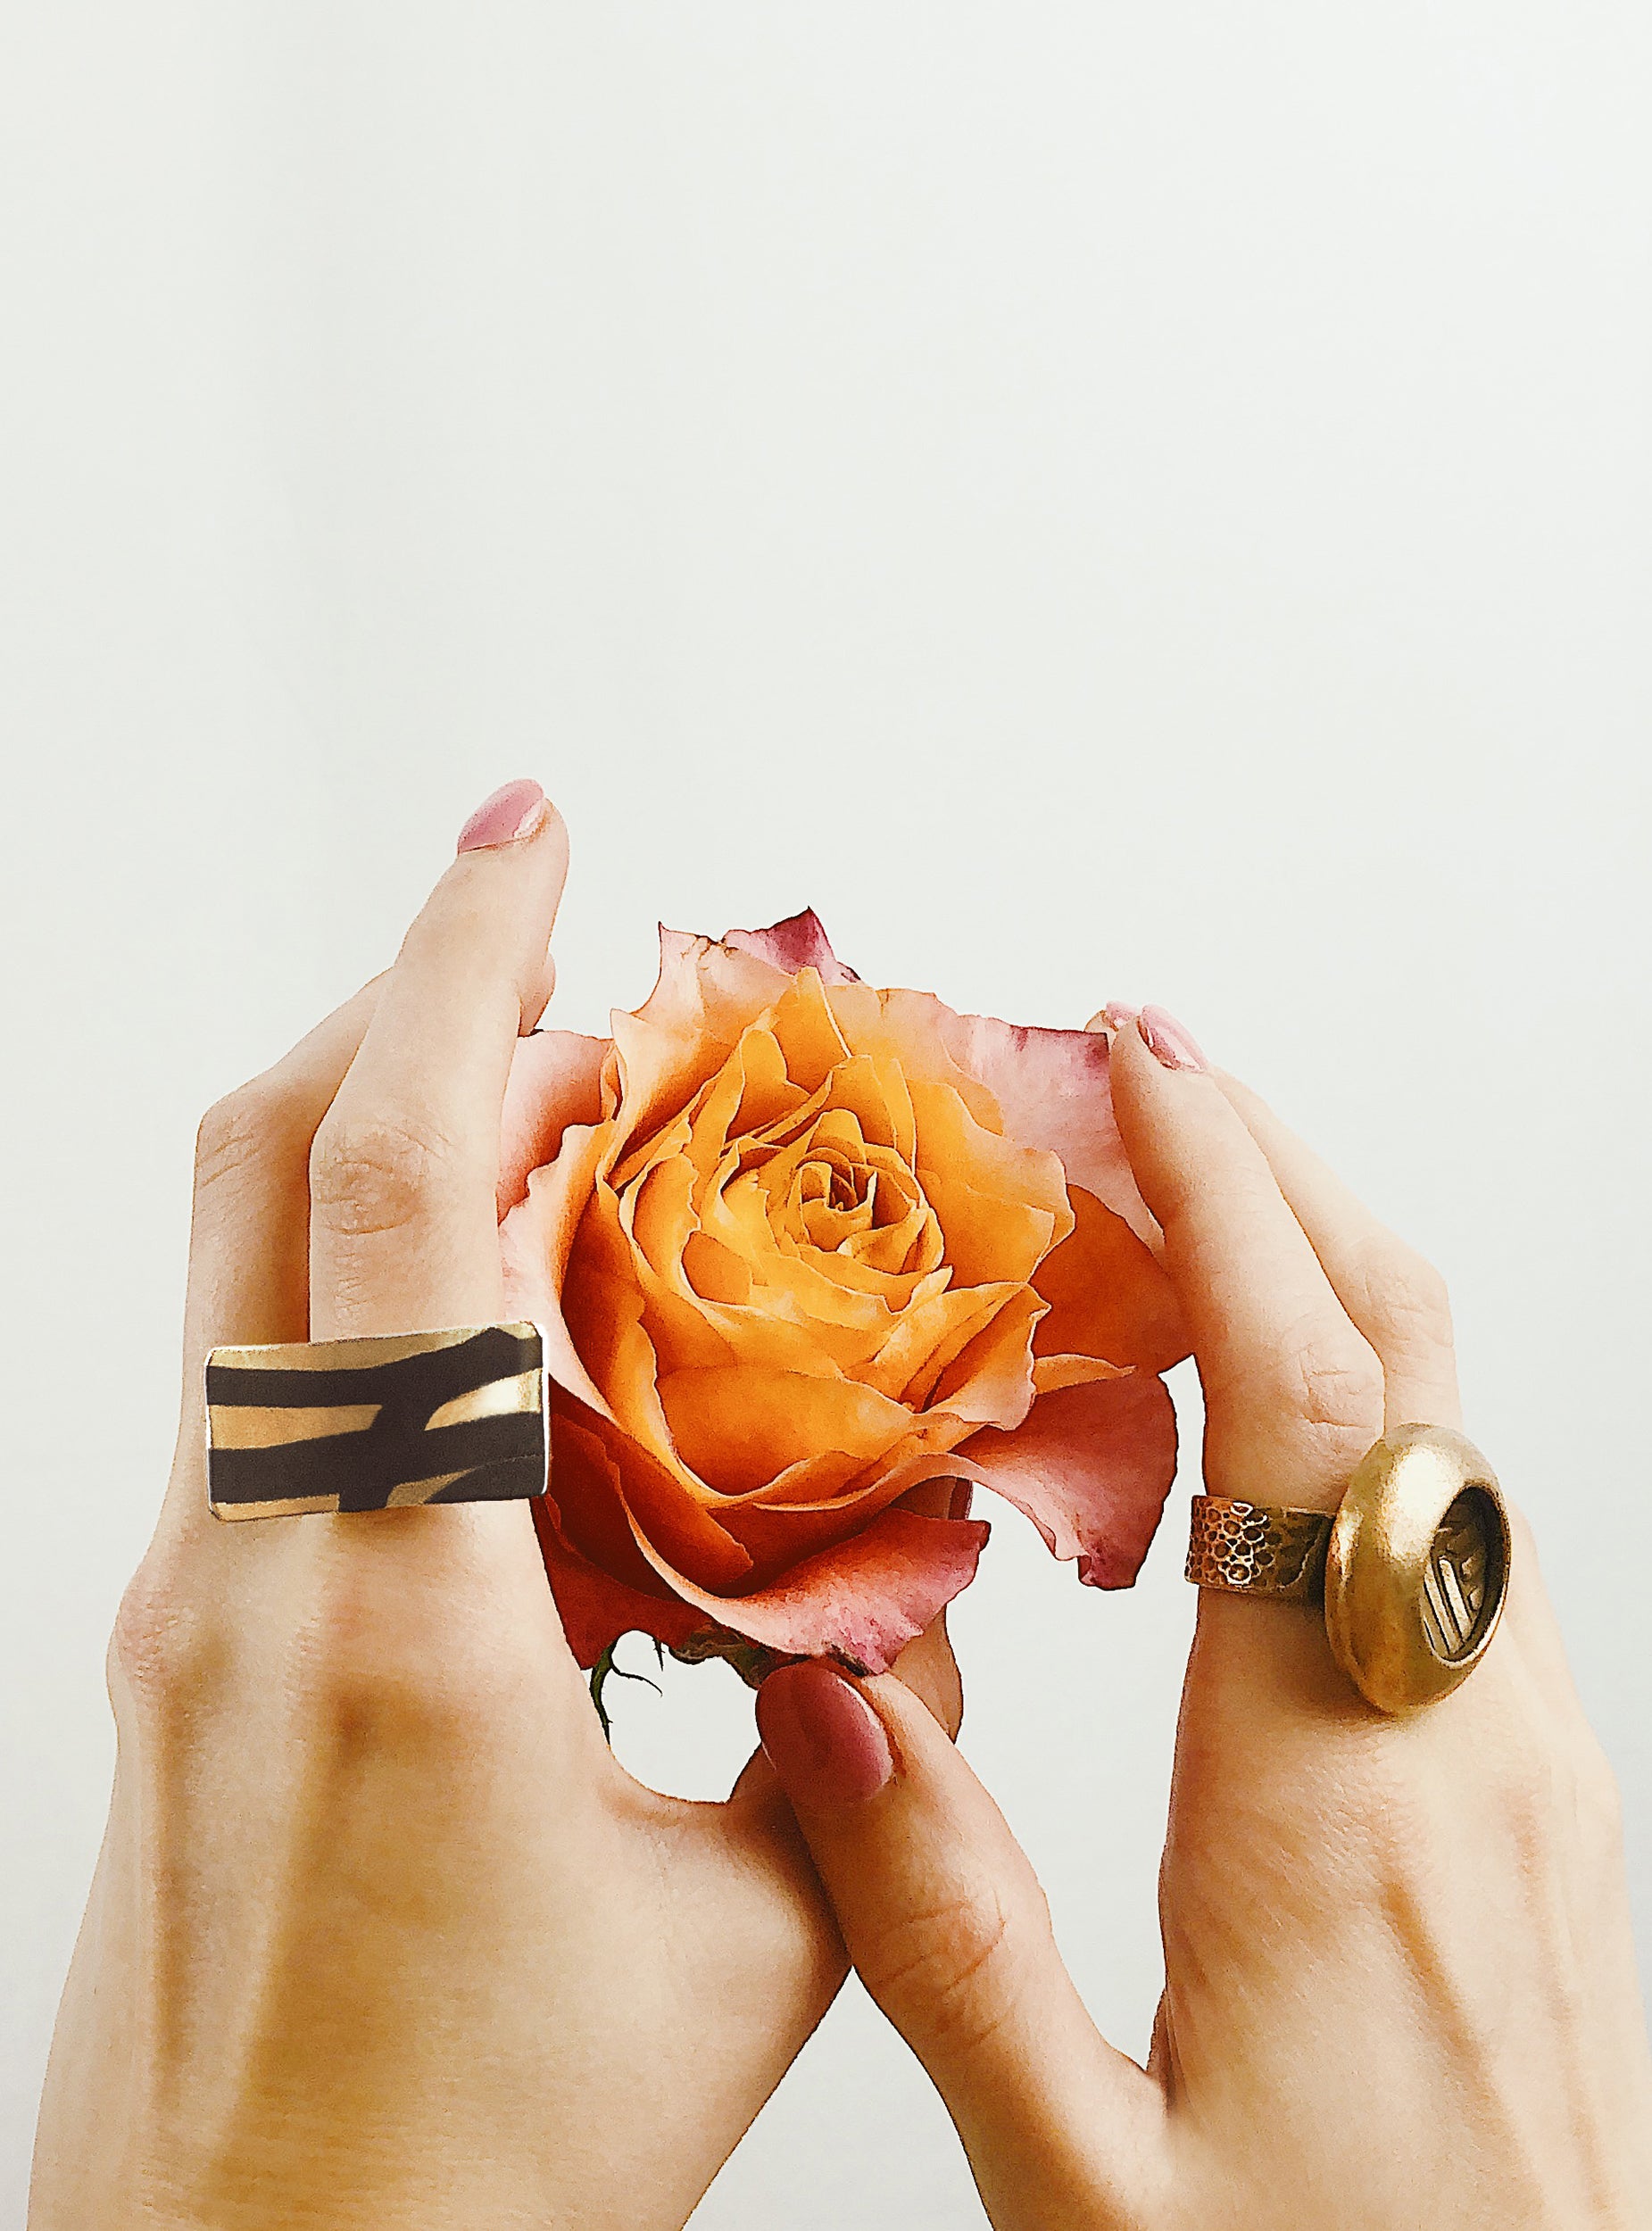 RINGS THAT MAKE A STATEMENT